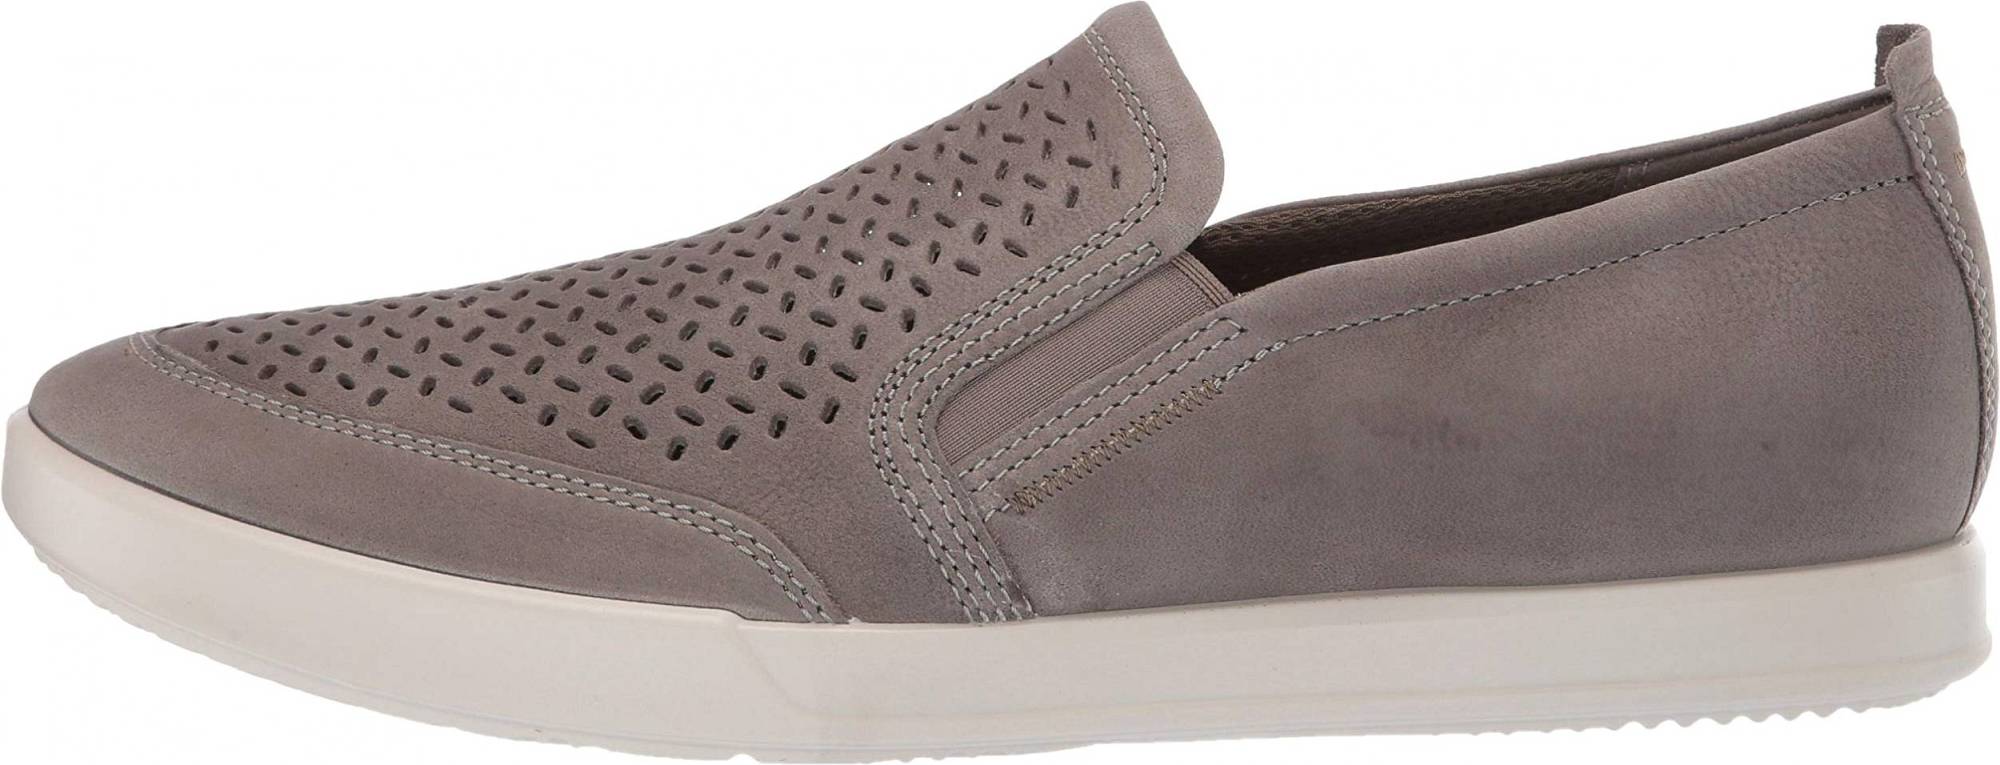 Ecco Collin 2.0 Slip On – Shoes Reviews & Reasons To Buy